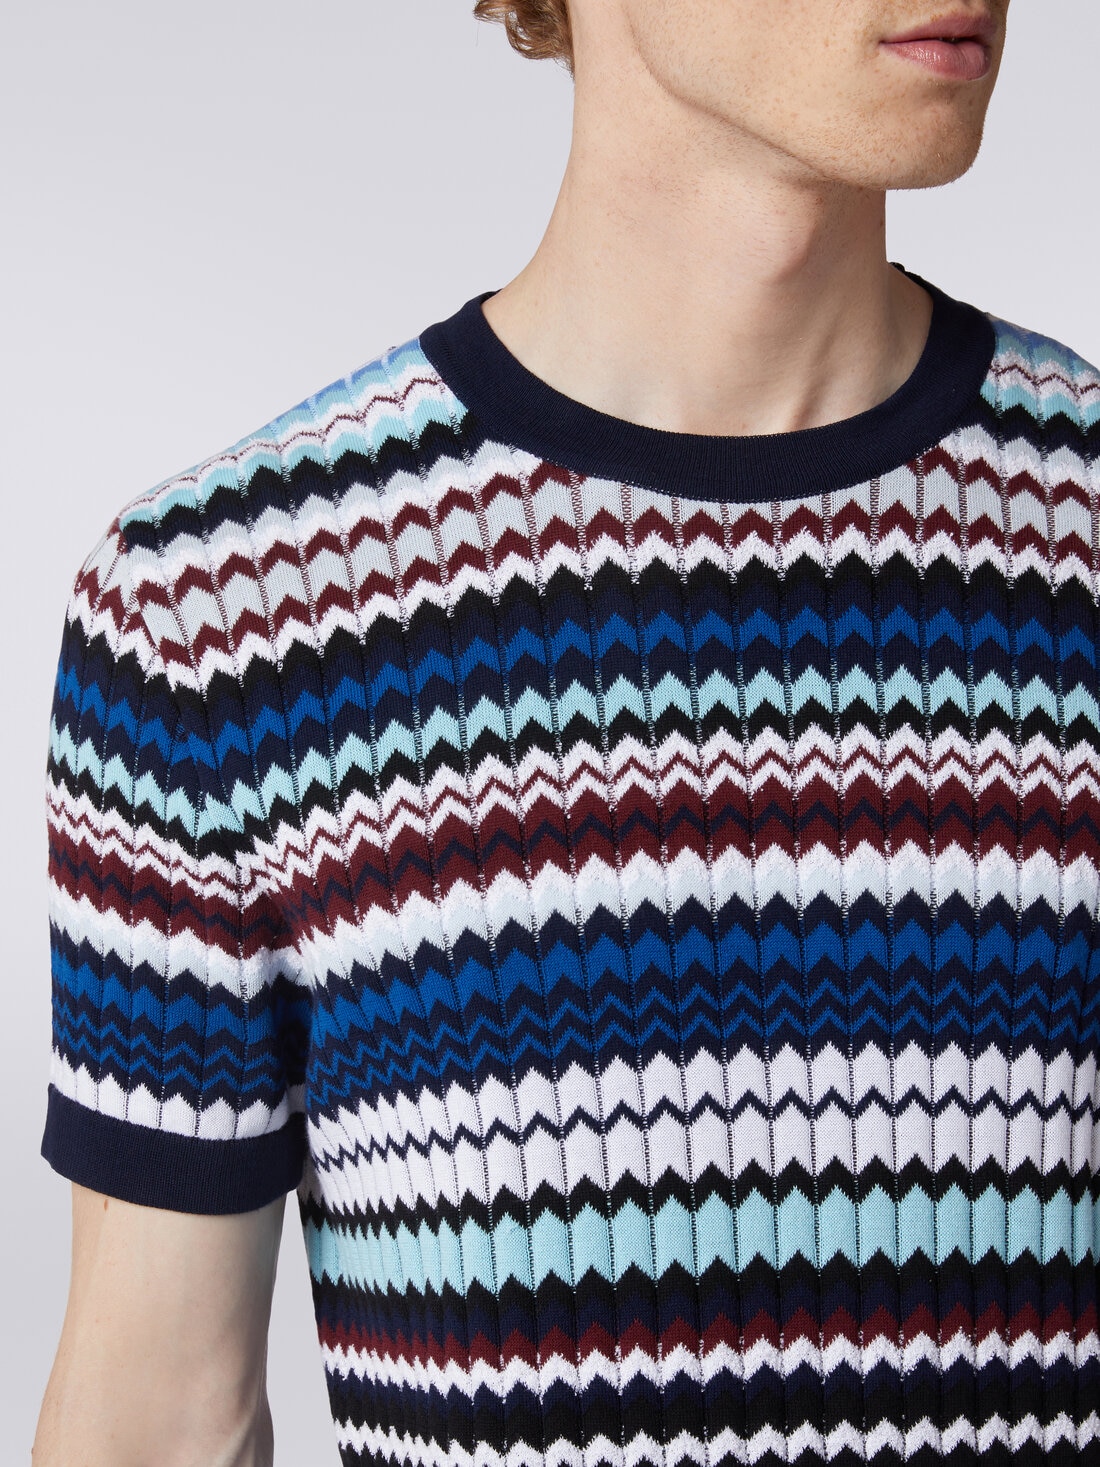 T-shirt in ribbed zigzag cotton knit, Multicoloured  - US24SL0DBK034NS72EY - 4